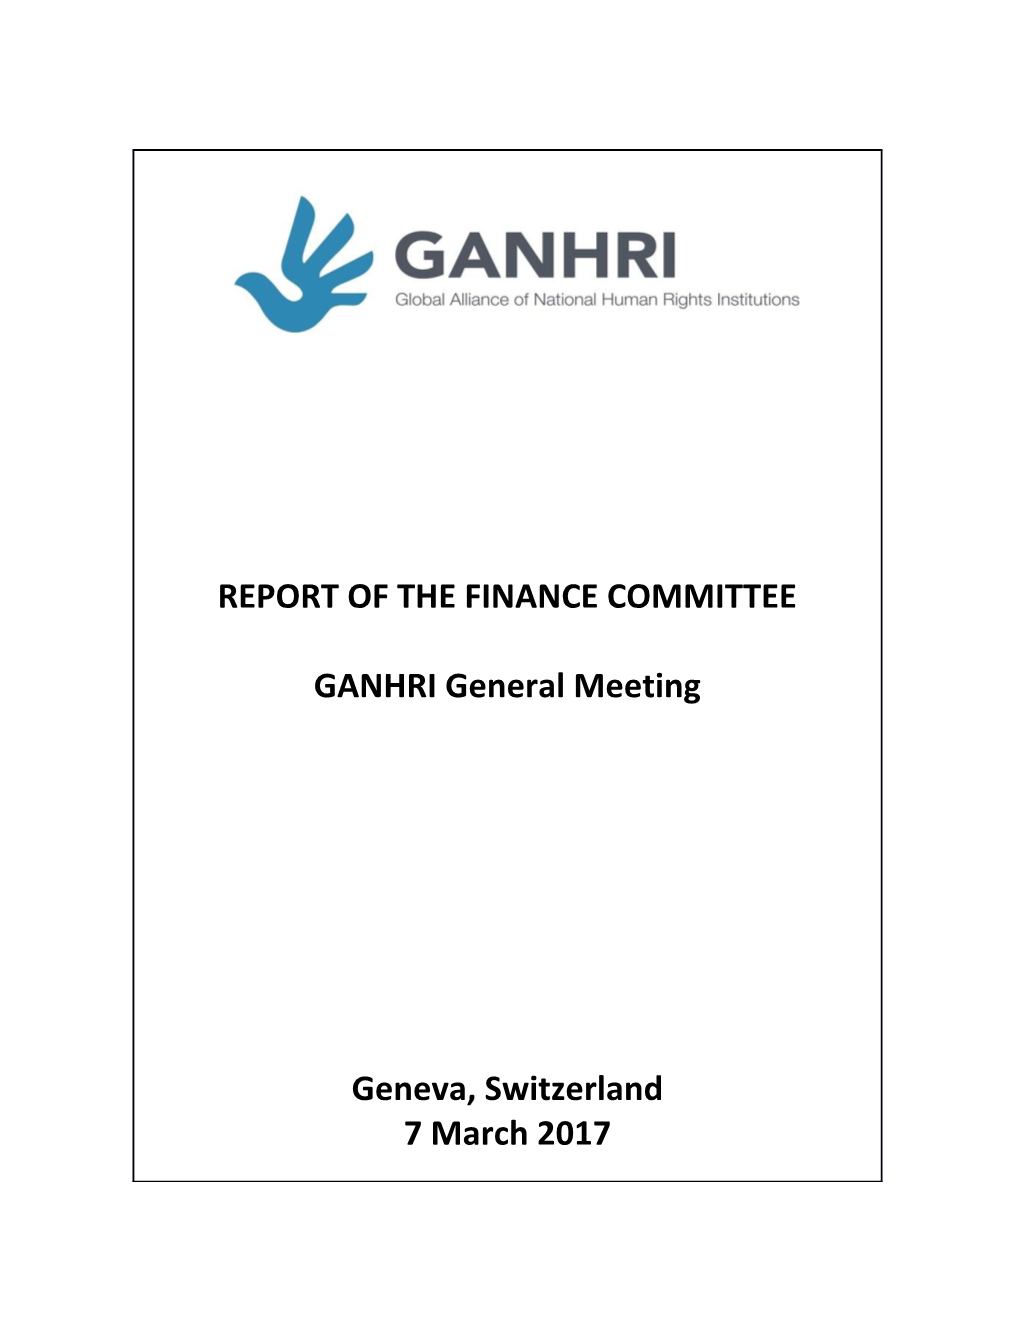 Report of the Finance Committee